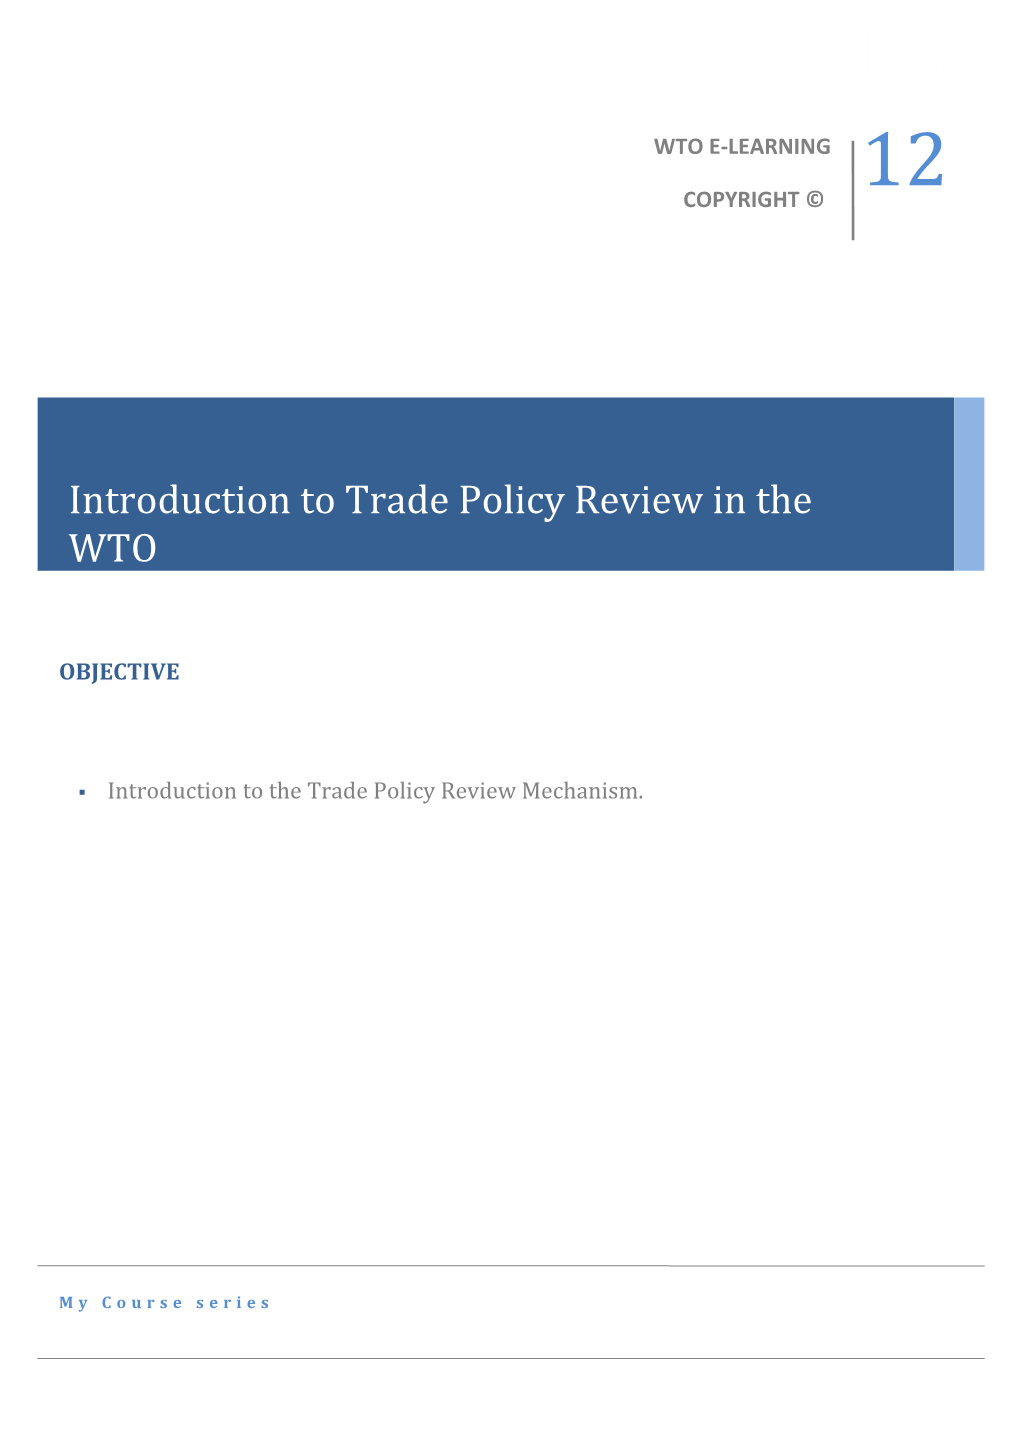 In This Module, We Will Introduce Annexes 2 and 3 to the Agreement Establishing the WTO